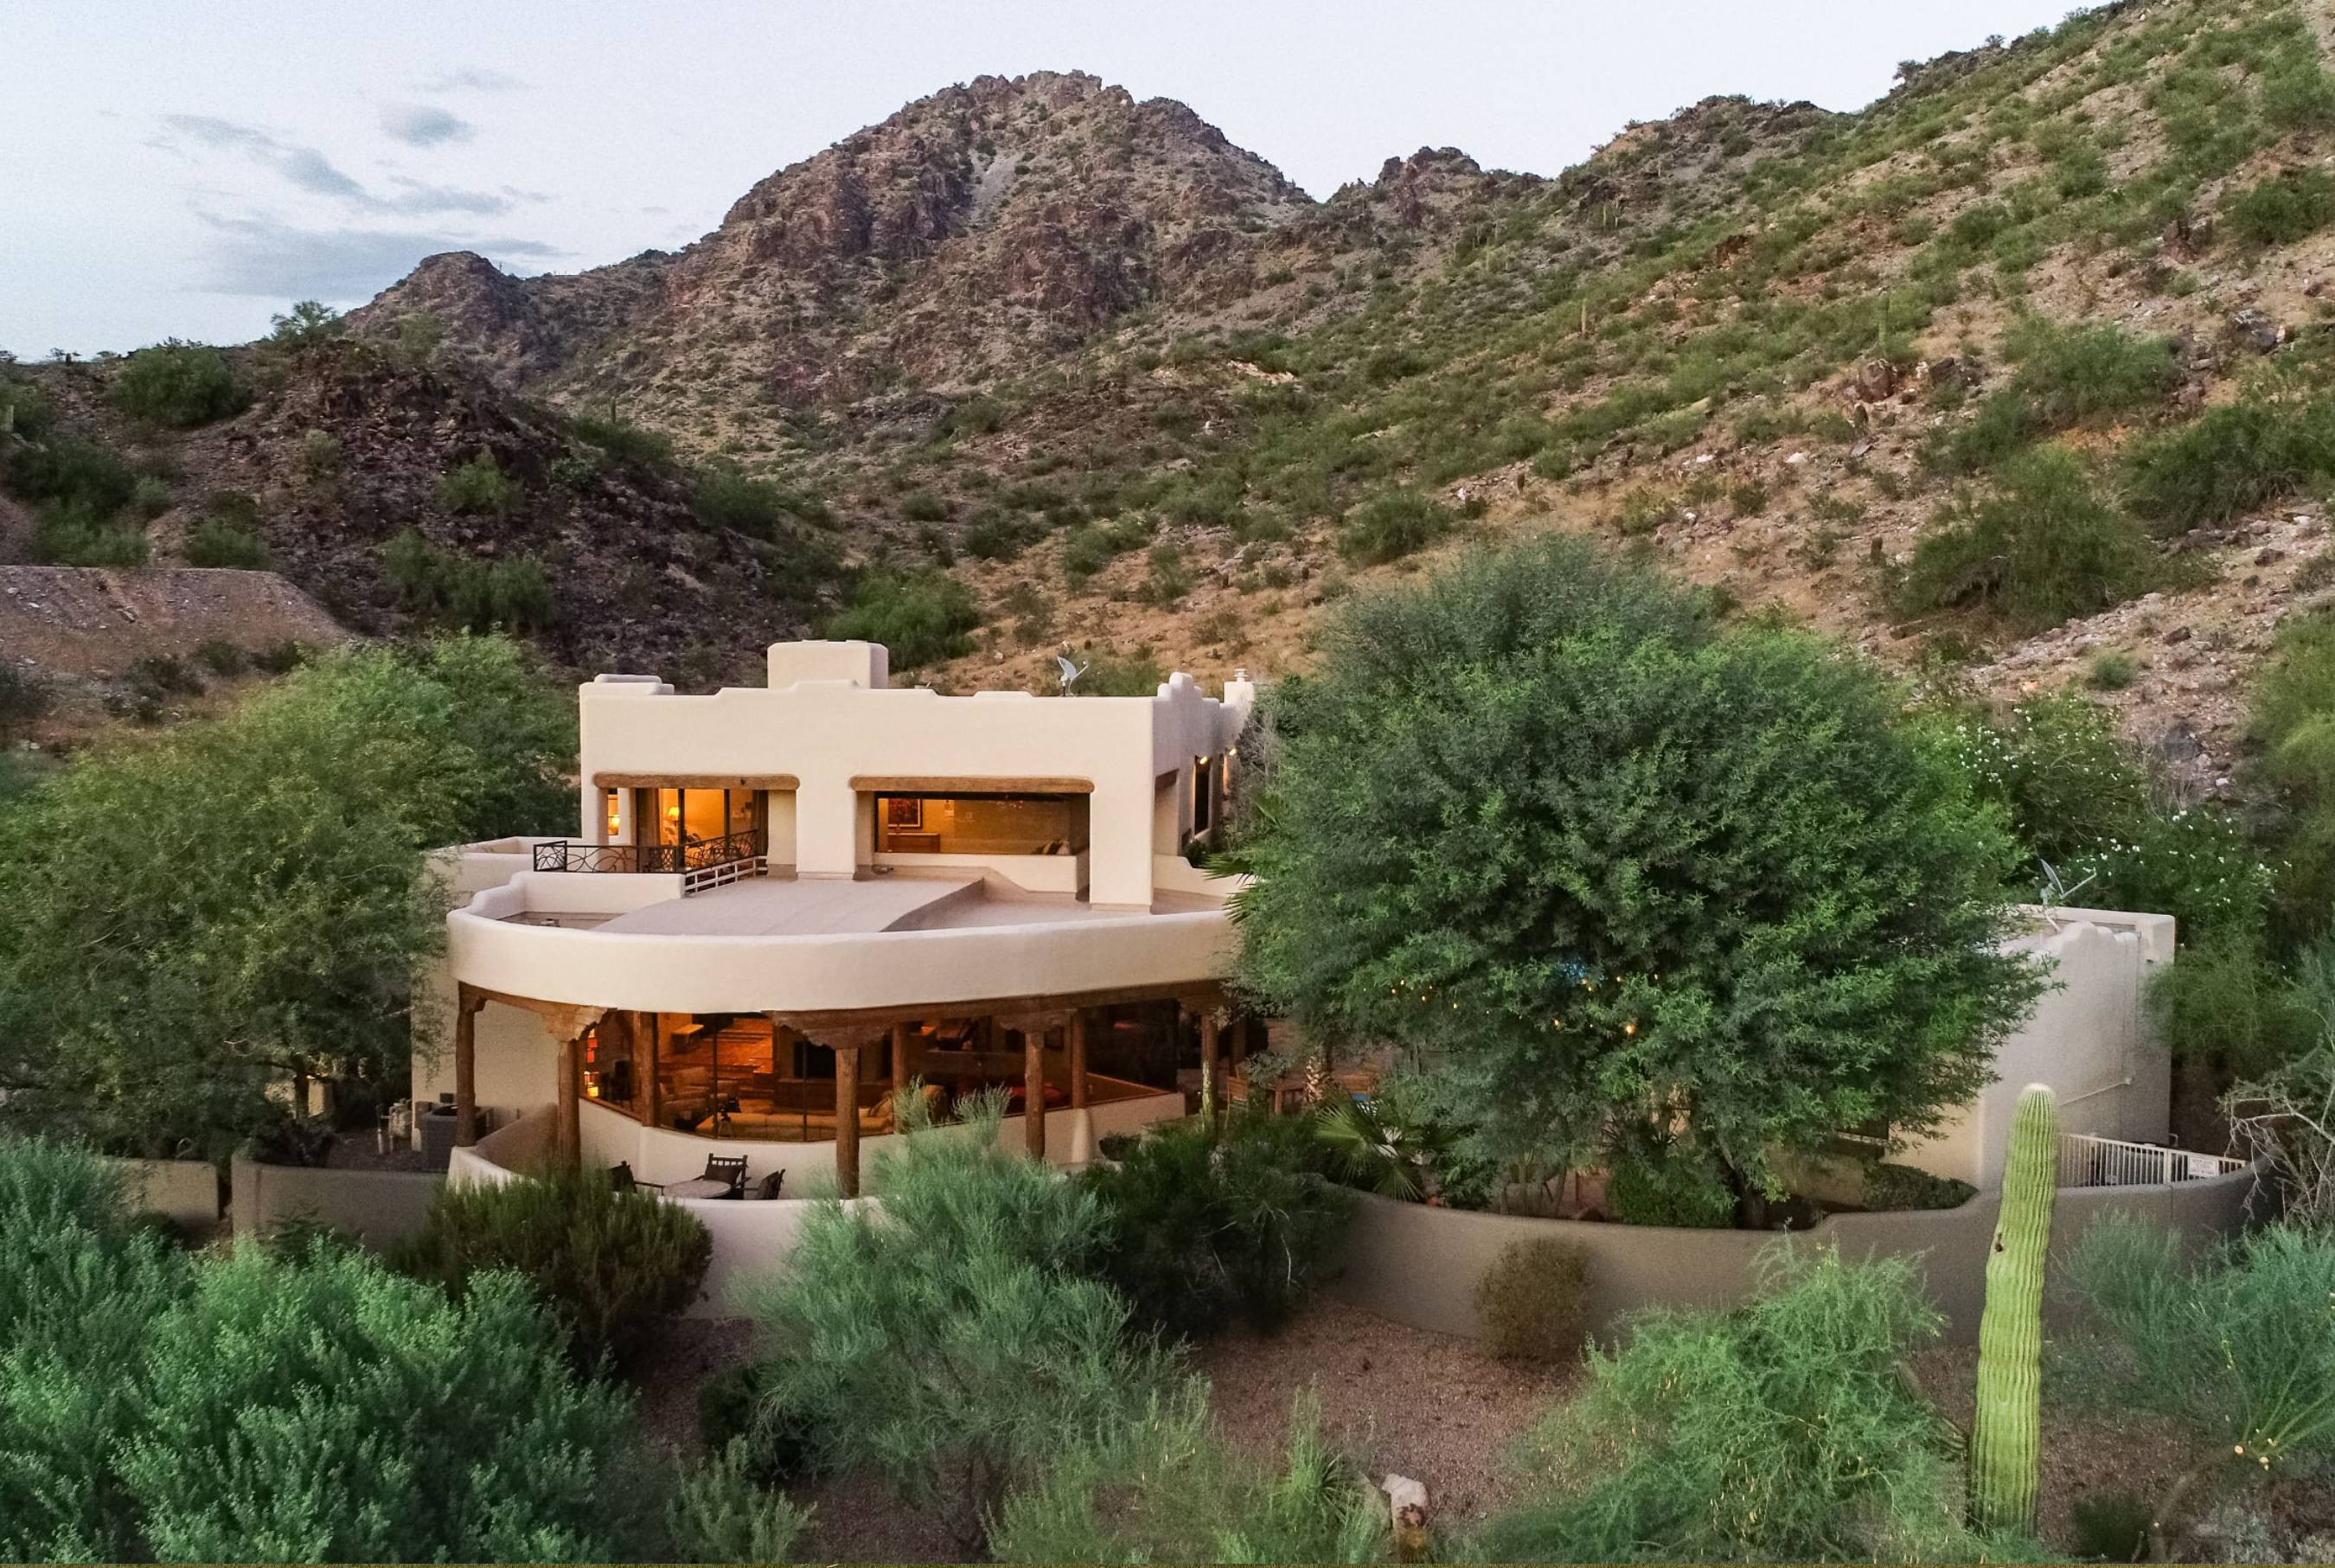 Phoenix, Arizona – “Happy Roadrunner” is an impeccable, private retreat within the city featuring a resort-style backyard and panoramic views of the surrounding landscape.